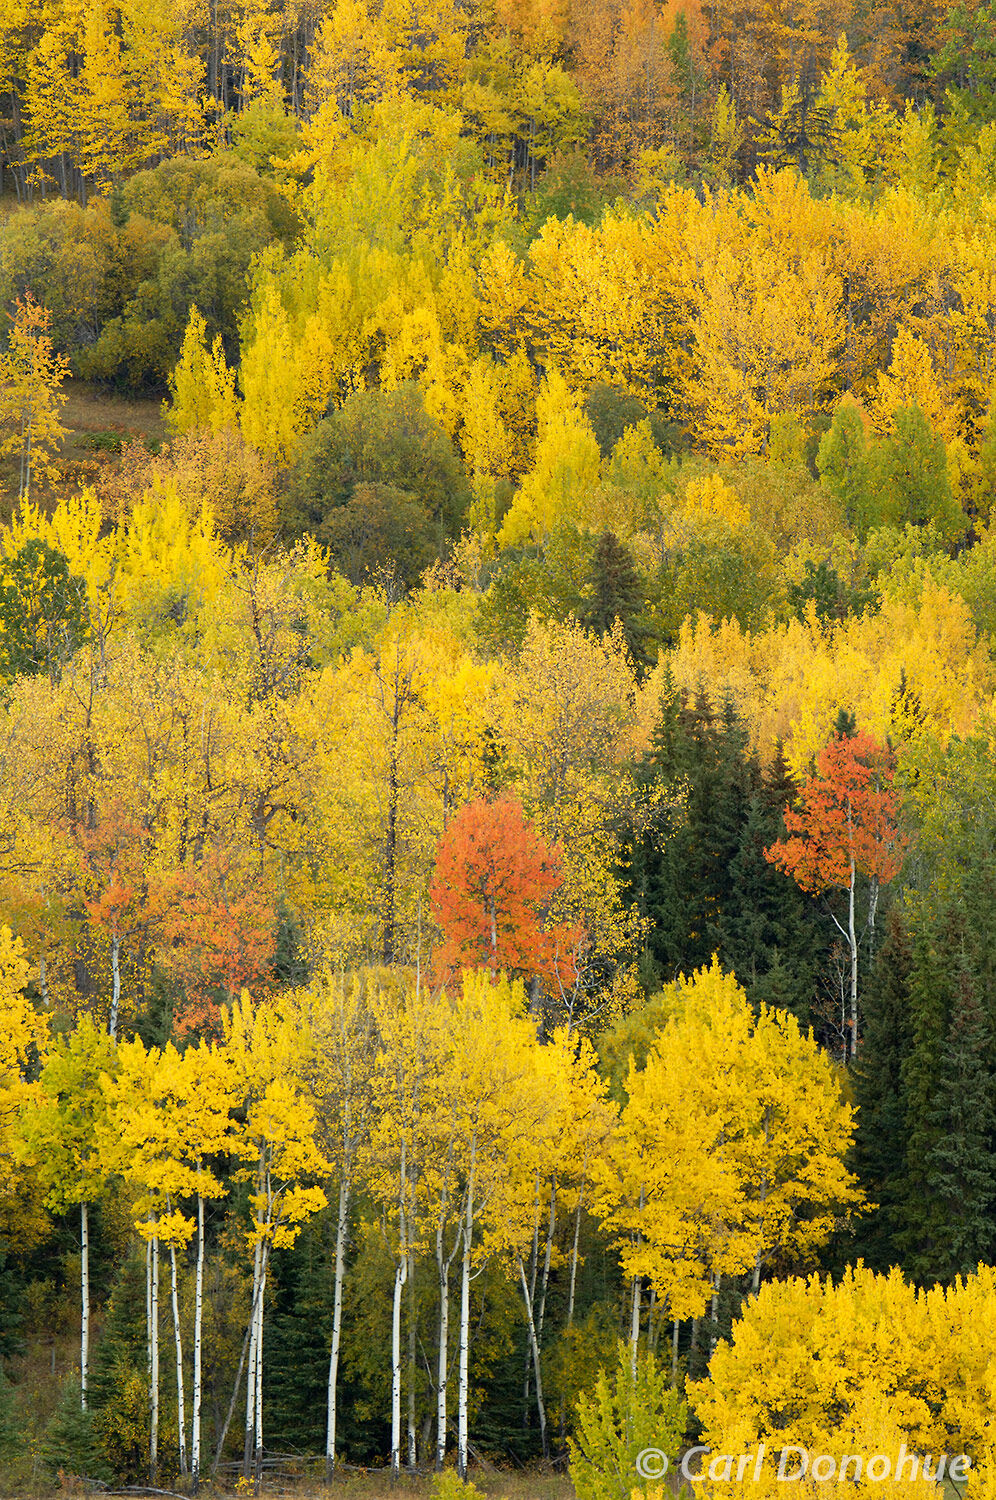 Rich with golds and orange and yellows, the aspens shine in fall. Colors glow in mid-September, British Columbia, Canada.